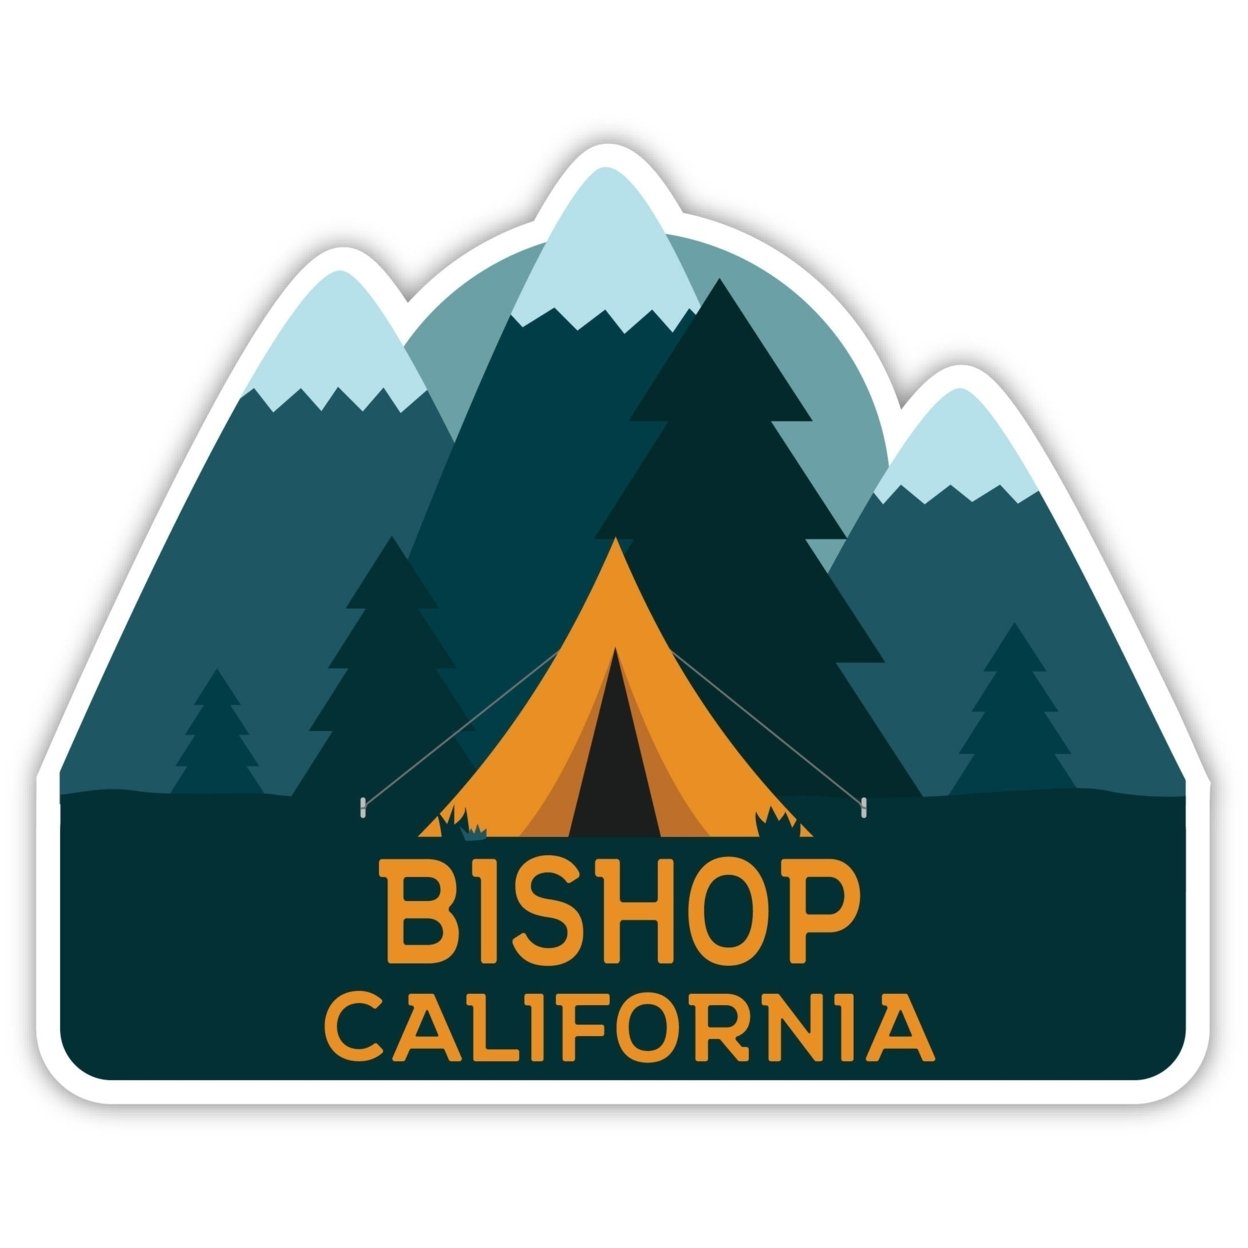 Bishop California Souvenir Decorative Stickers (Choose Theme And Size) - 4-Pack, 4-Inch, Bear